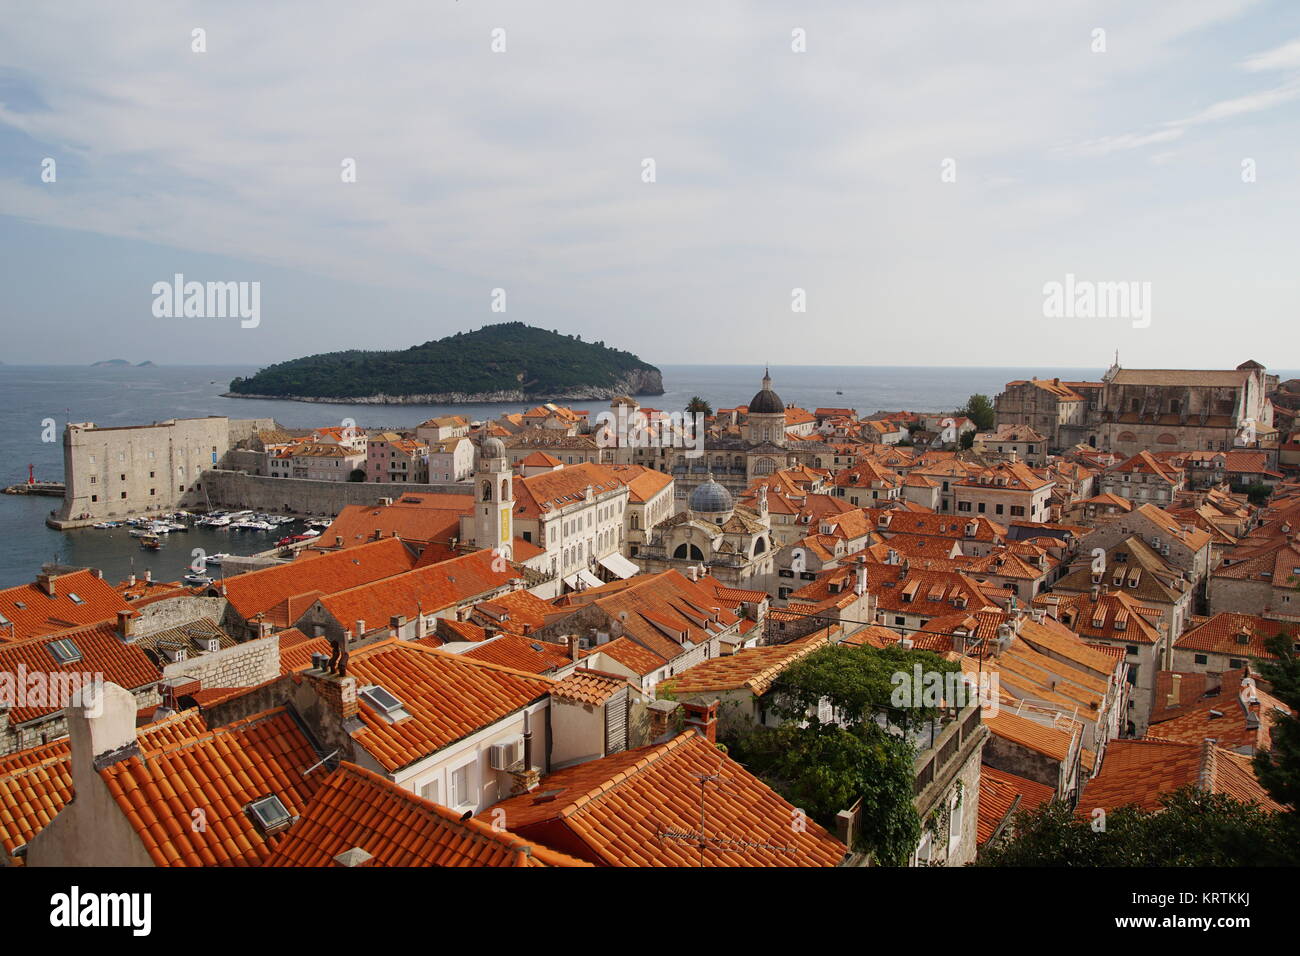 view from the defensive wall to the old town of dubrovnik Stock Photo